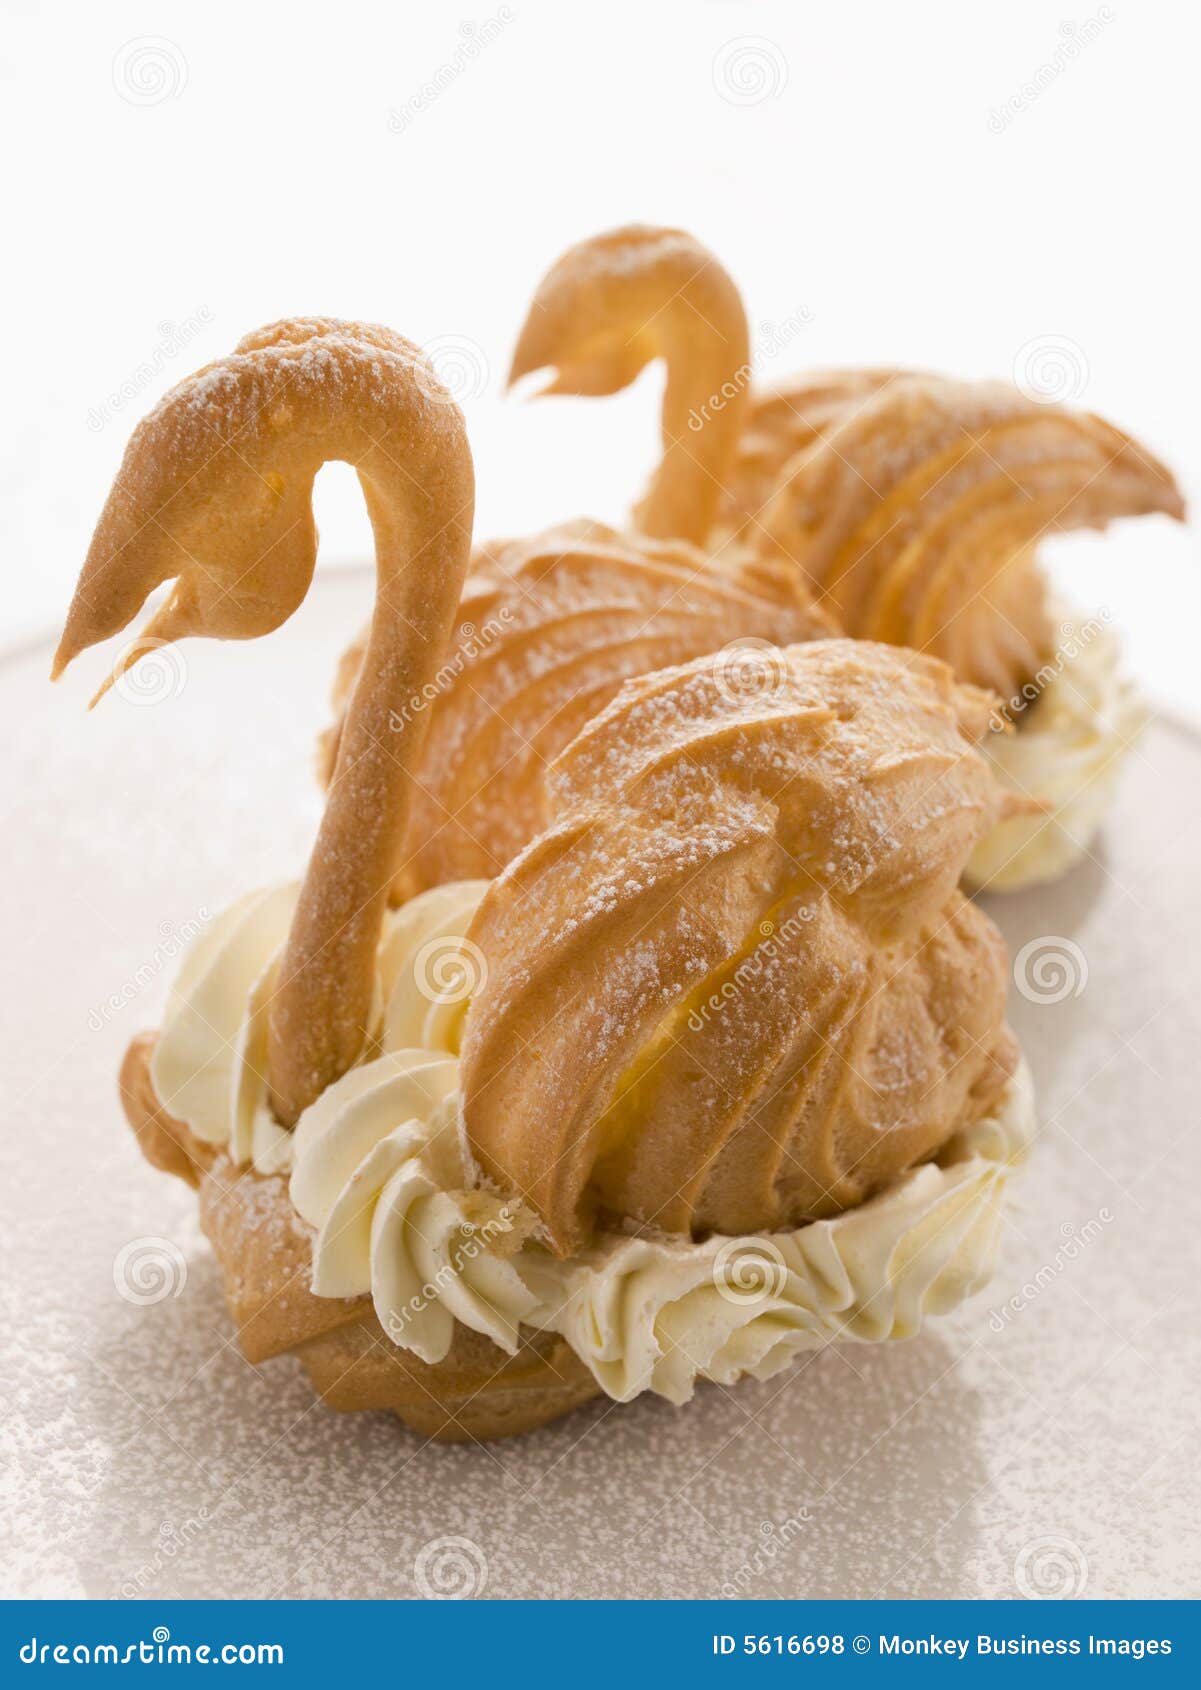 two choux swans filled with chantilly cream